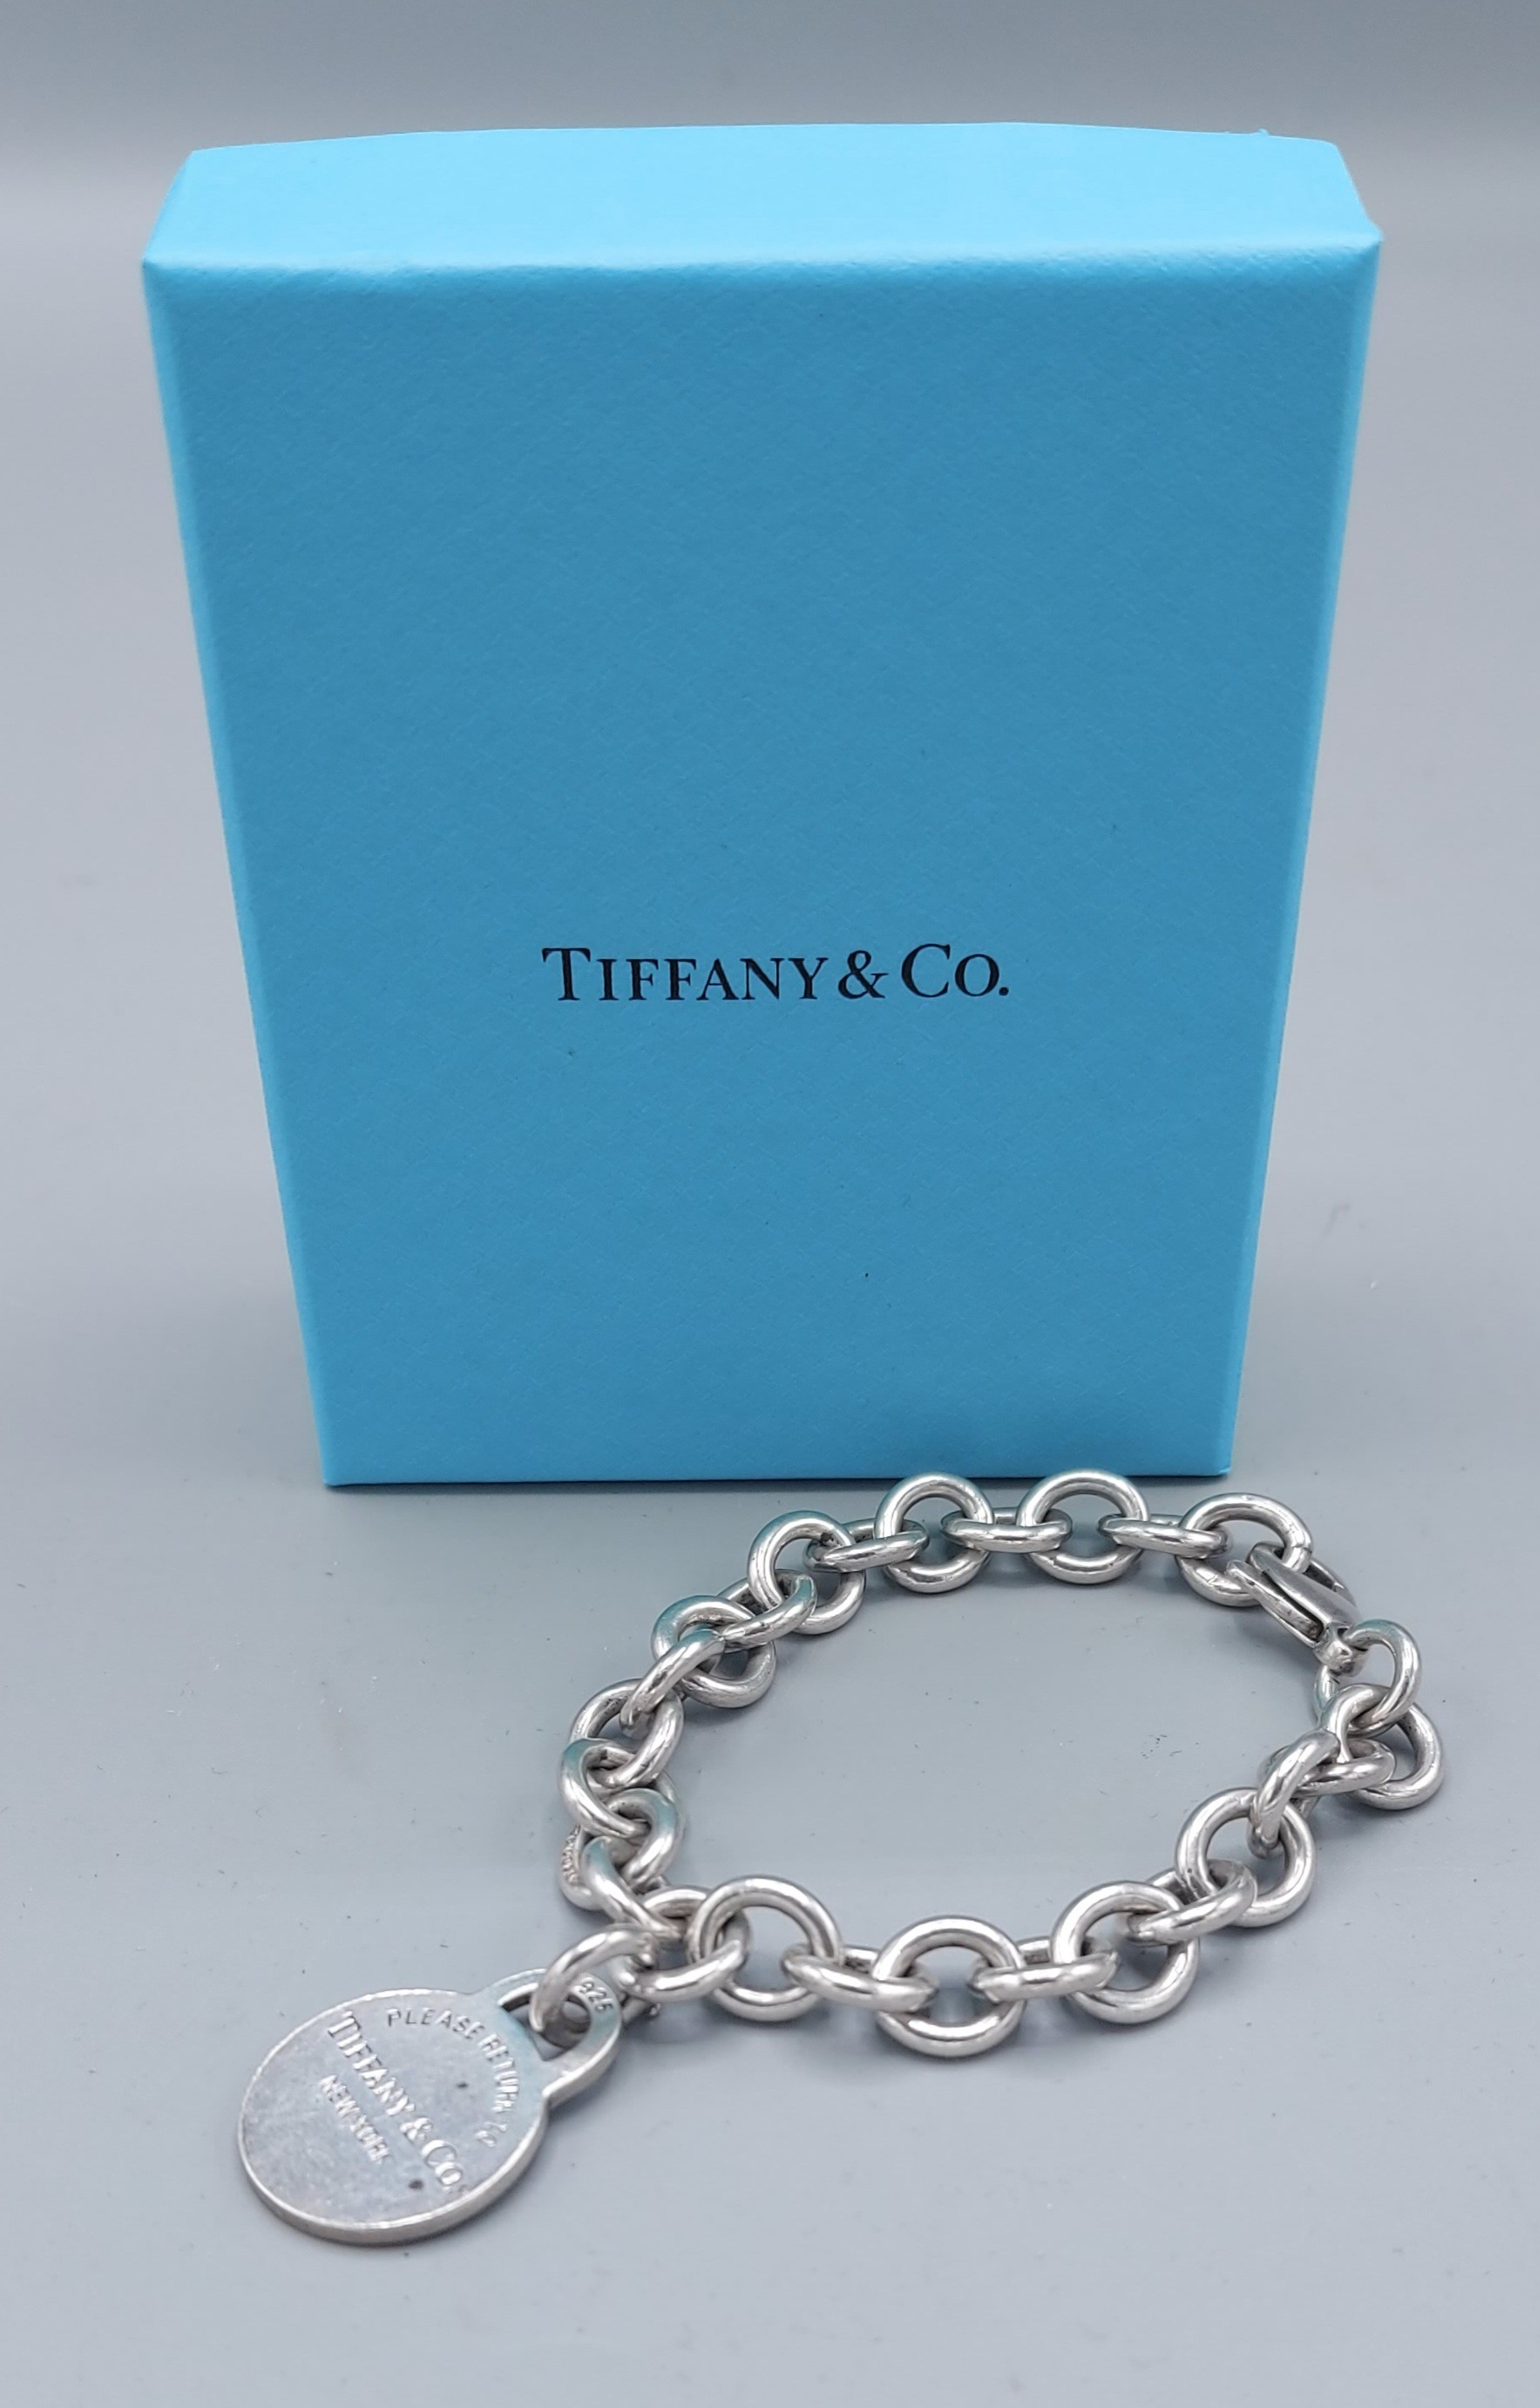 Tiffany and Co. a 925 silver linked bracelet with circular tab inscribed Please Return To Tiffany